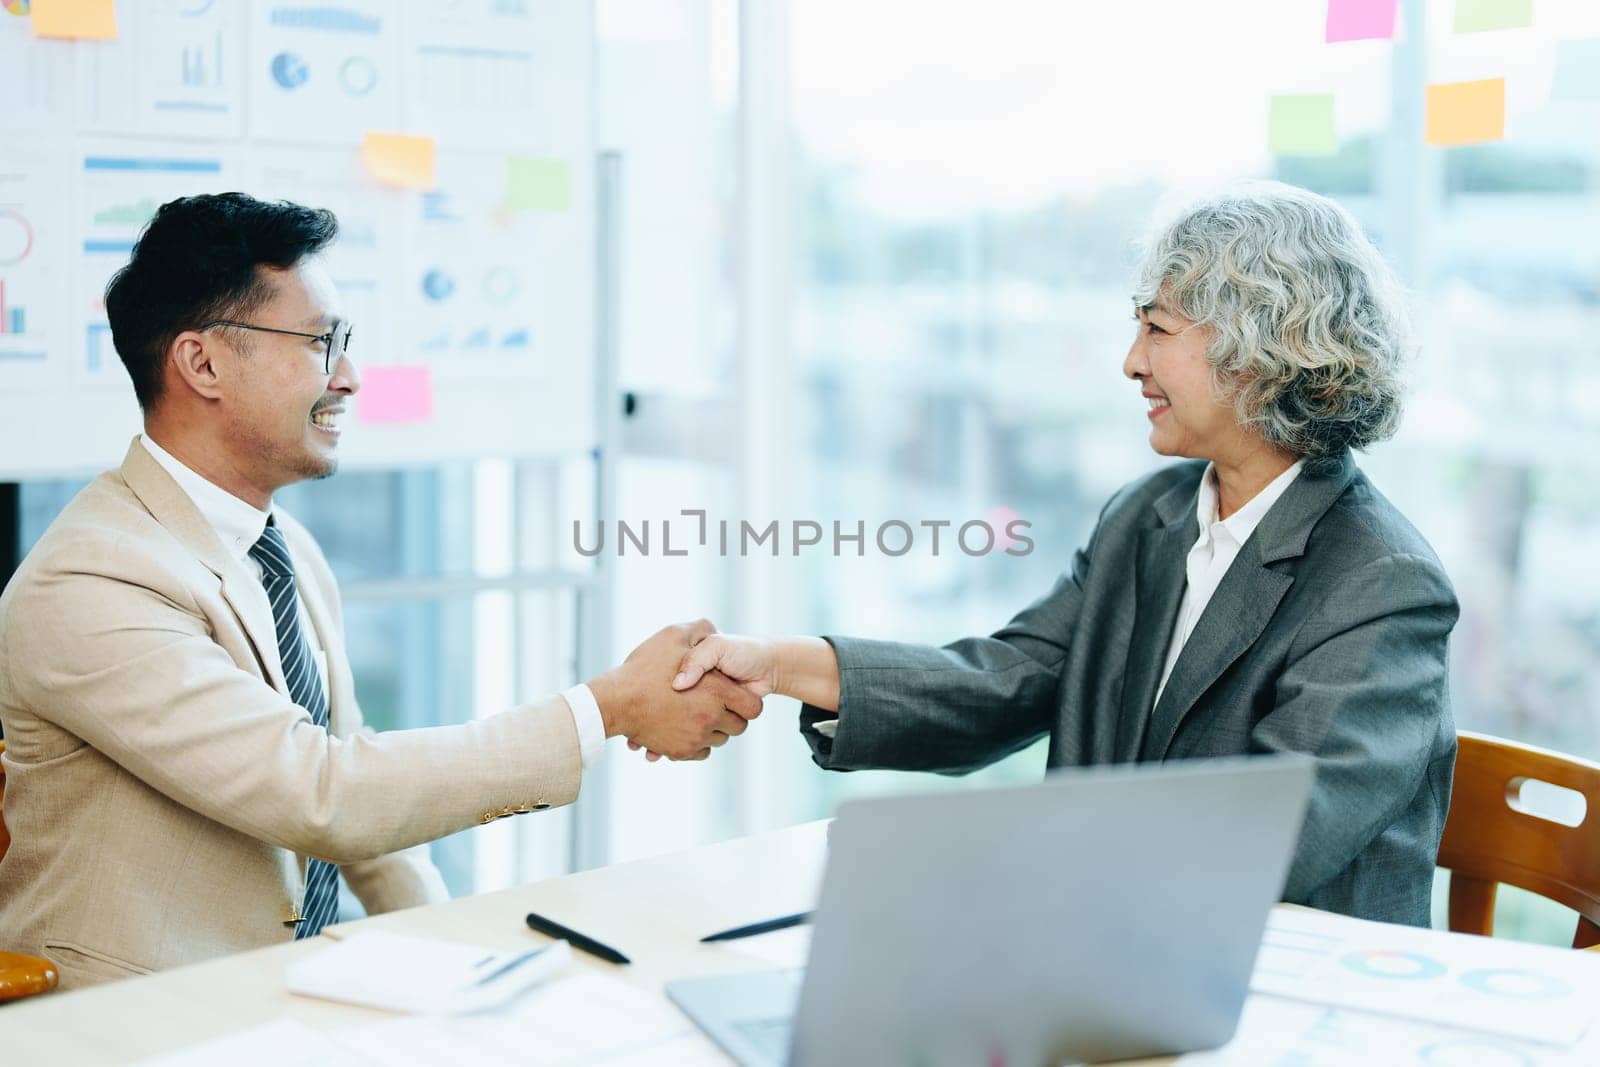 Asian entrepreneurs handshakes to congratulate the agreement between the two companies to enhance investment and financial strength. deal concept.